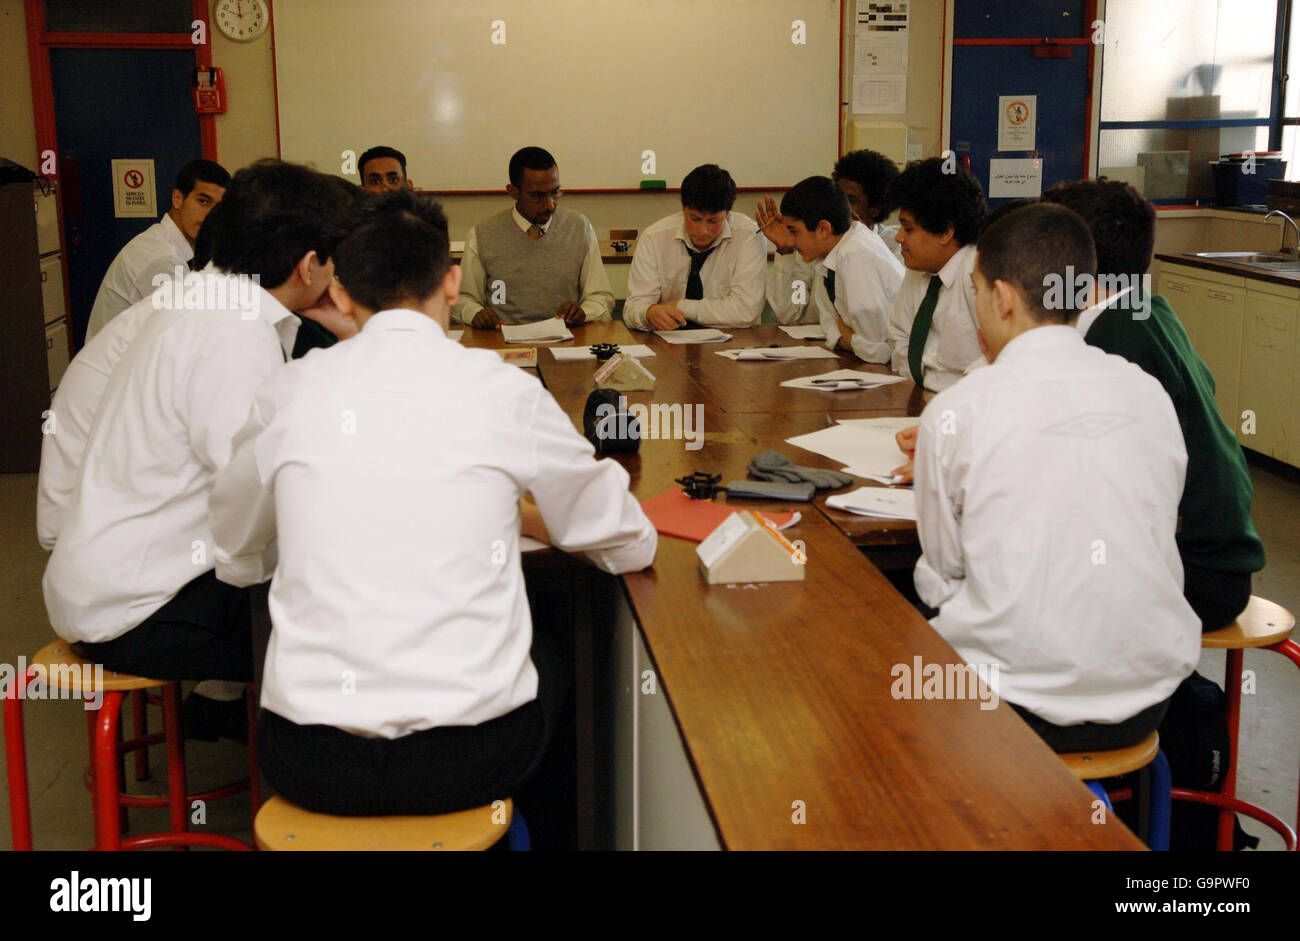 Pupils attend a class at the King Fahad Academy in East Acton, London. Stock Photo